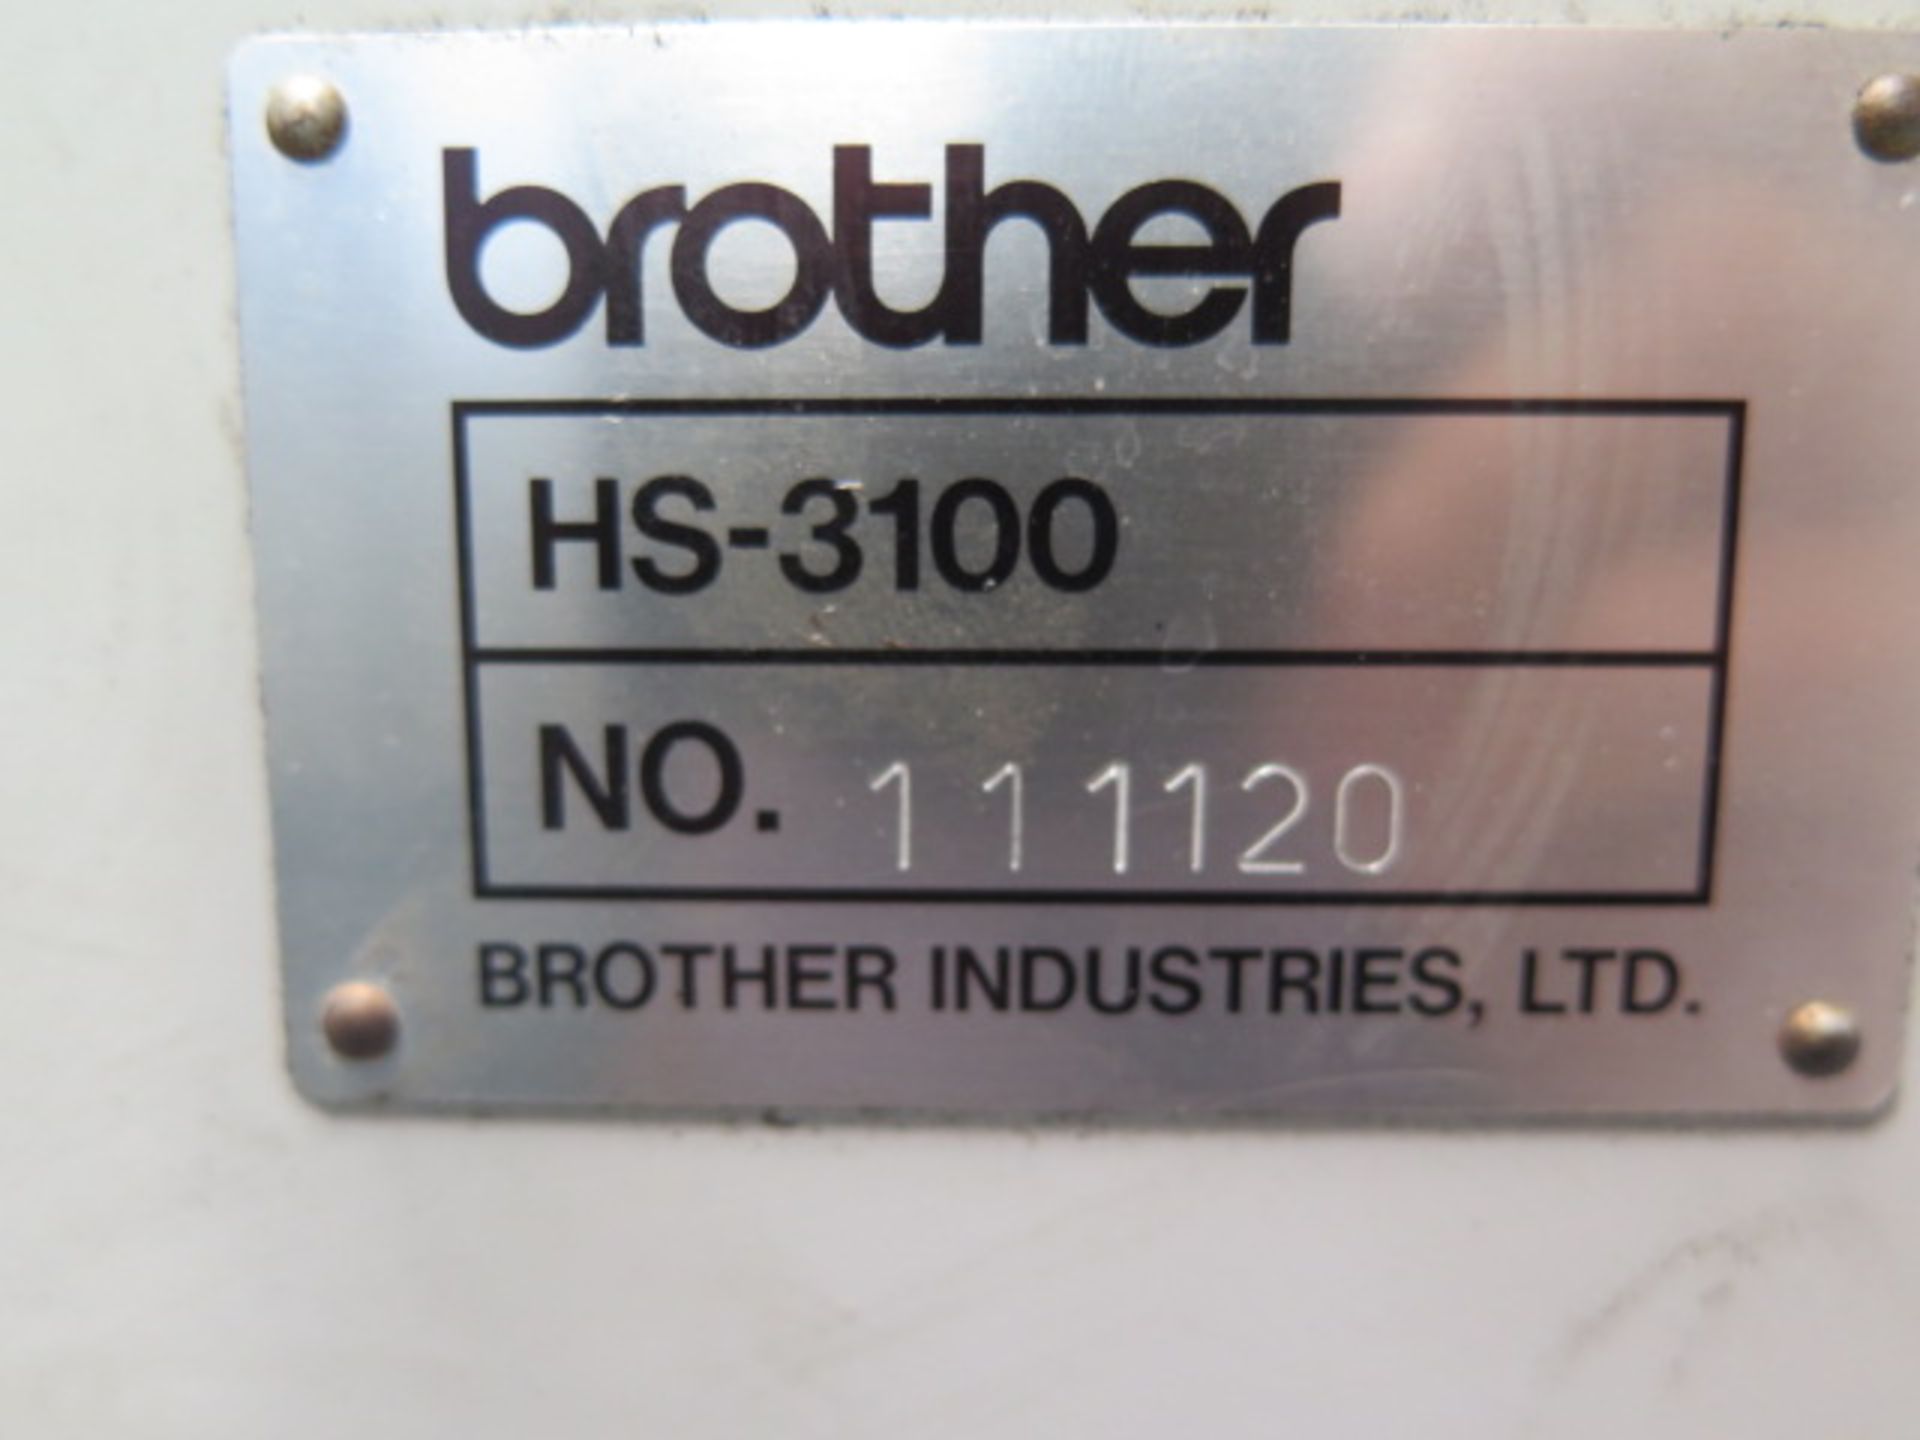 Brother HS-3100 CNC Wire EDM s/n 111120 w/ Brother CNC Controls, 8 3/4" x 11" Work Area, SOLD AS IS - Image 13 of 13